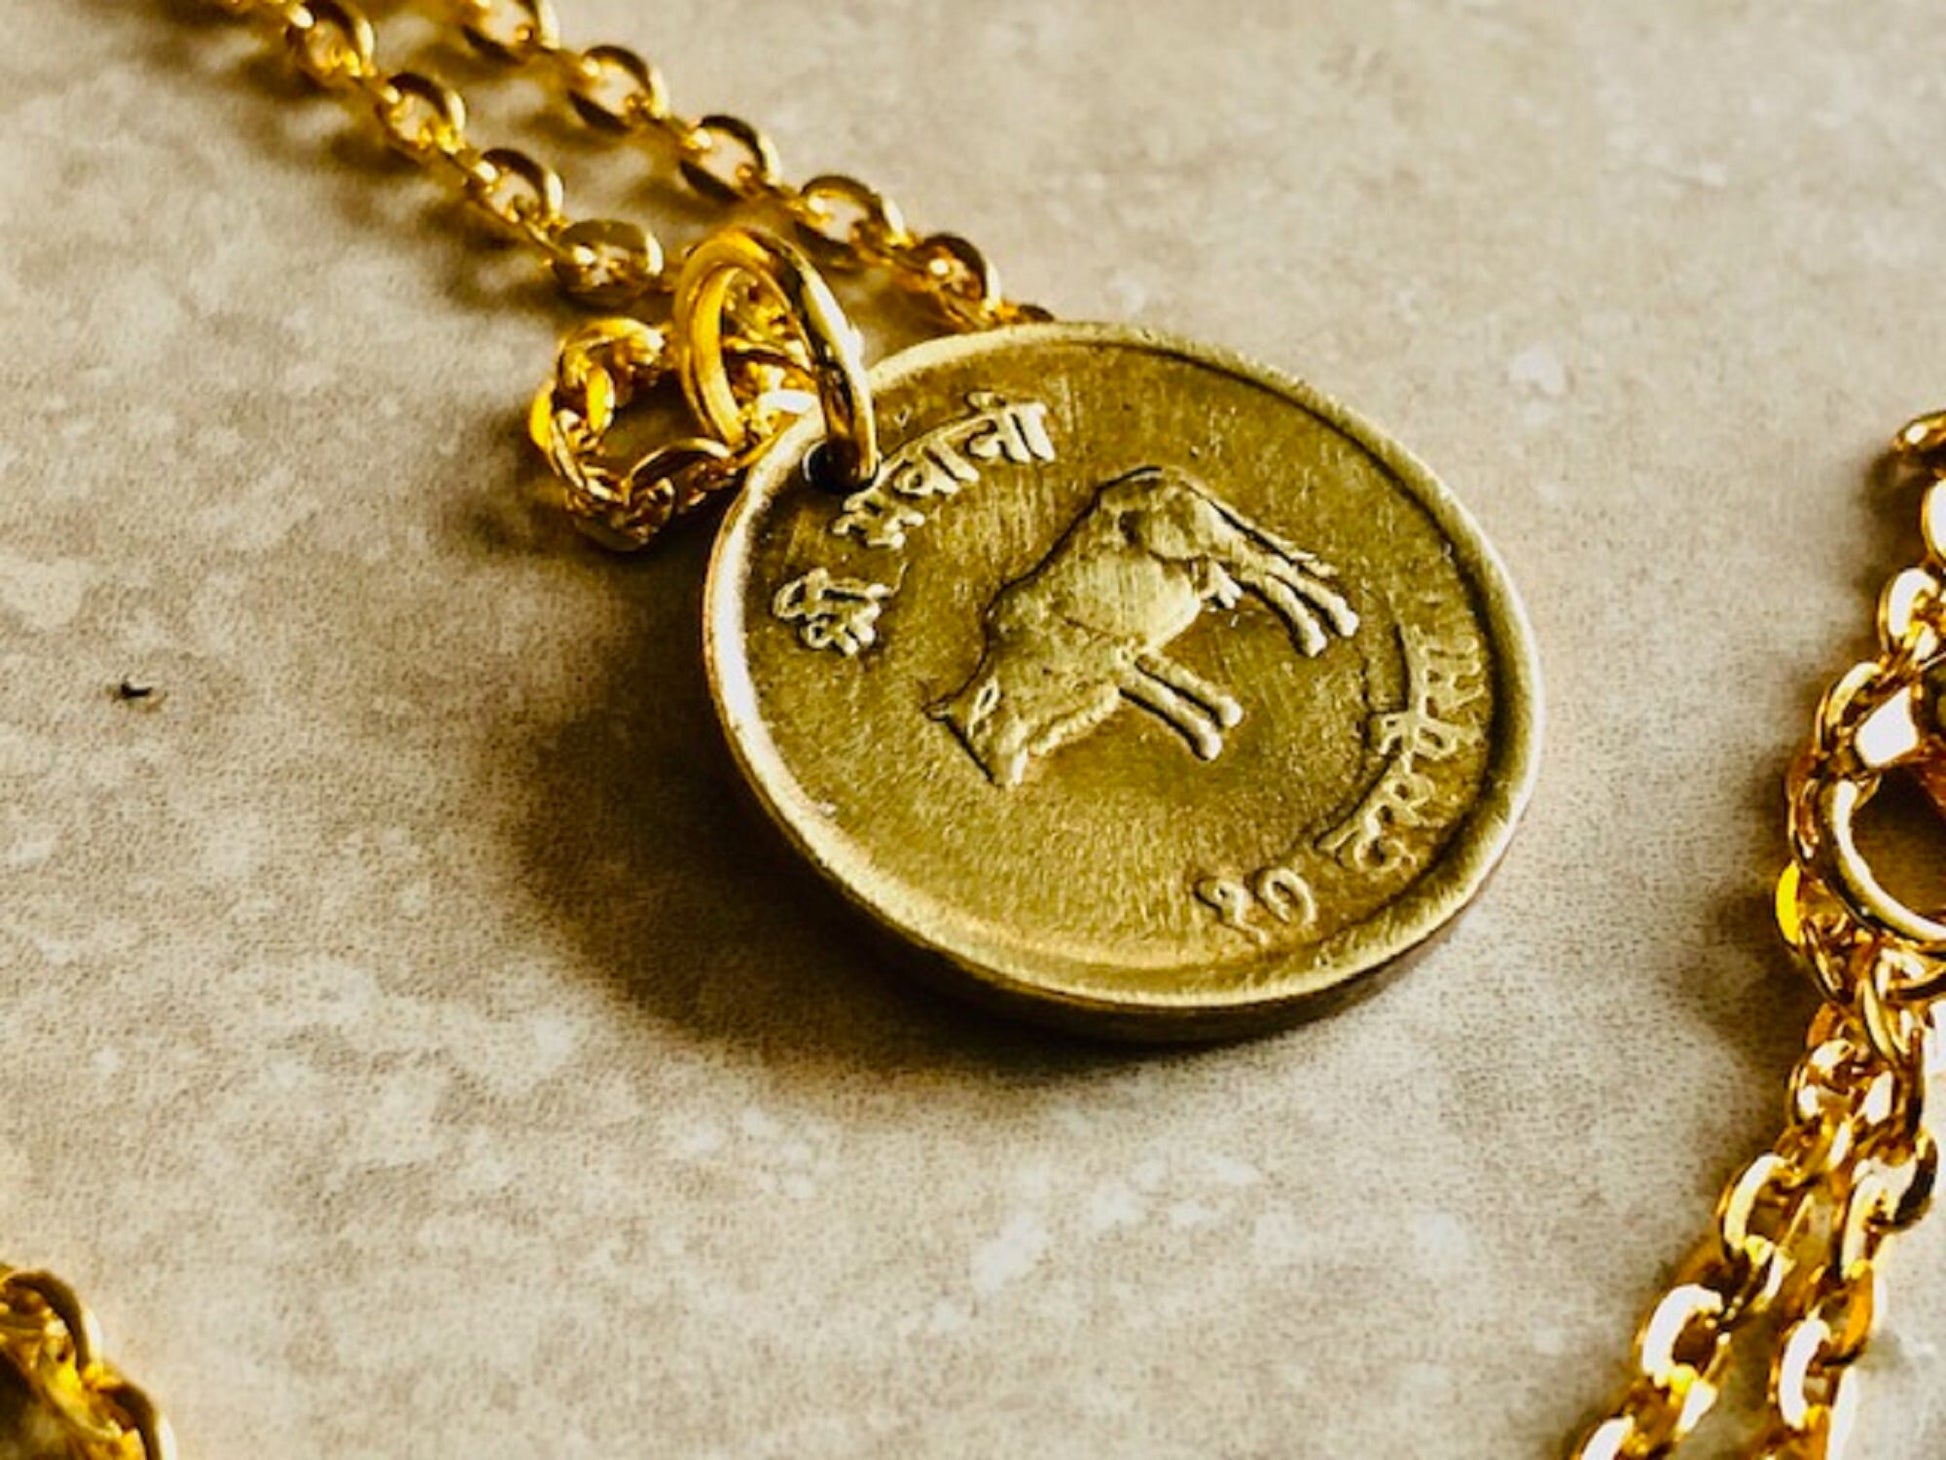 Nepal Coin Necklace Nepal Coin Cow Vintage Pendant Necklace Custom Made Rare Coins Coin Enthusiast Fashion Handmade Jewelry